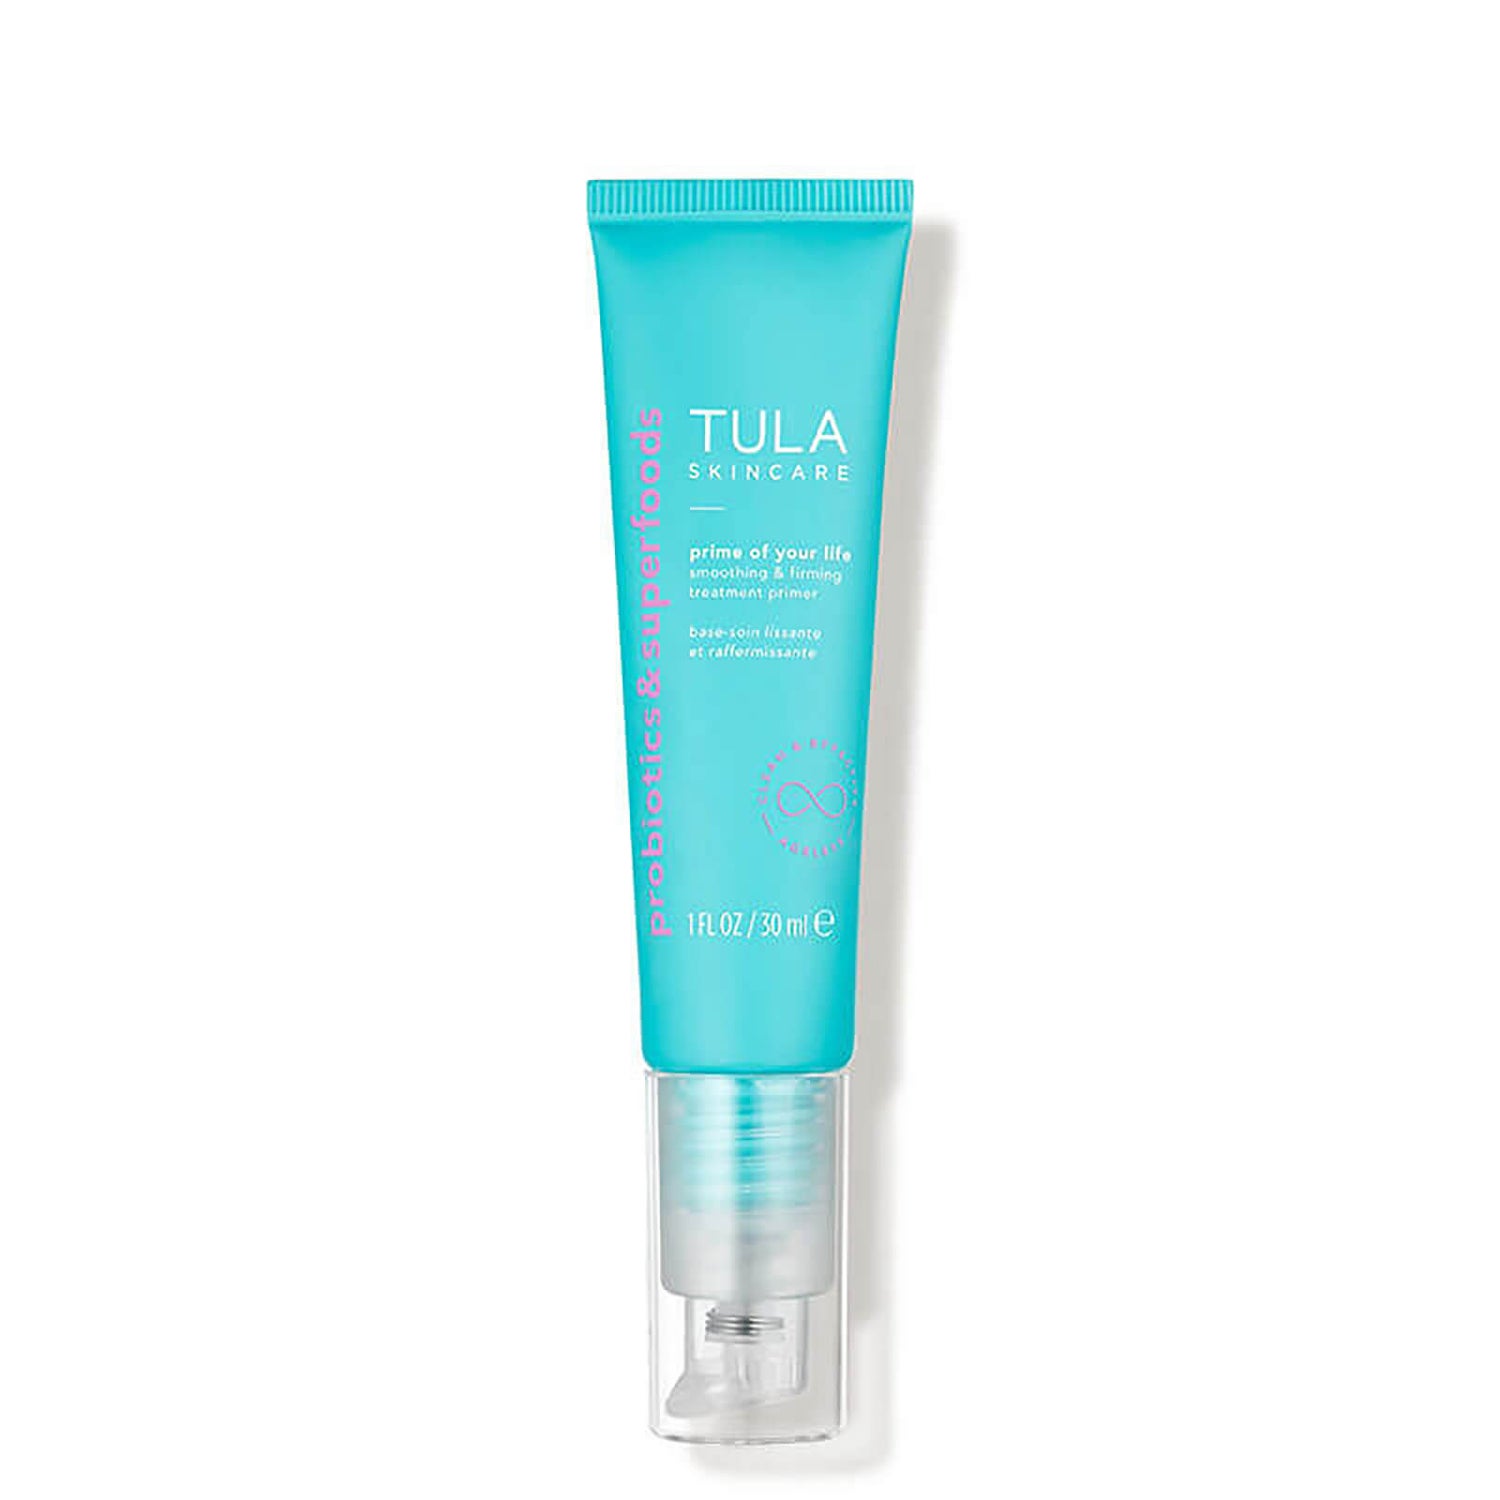 TULA Skincare Prime of Your Life Smoothing Firming Treatment Primer 1 fl. oz.